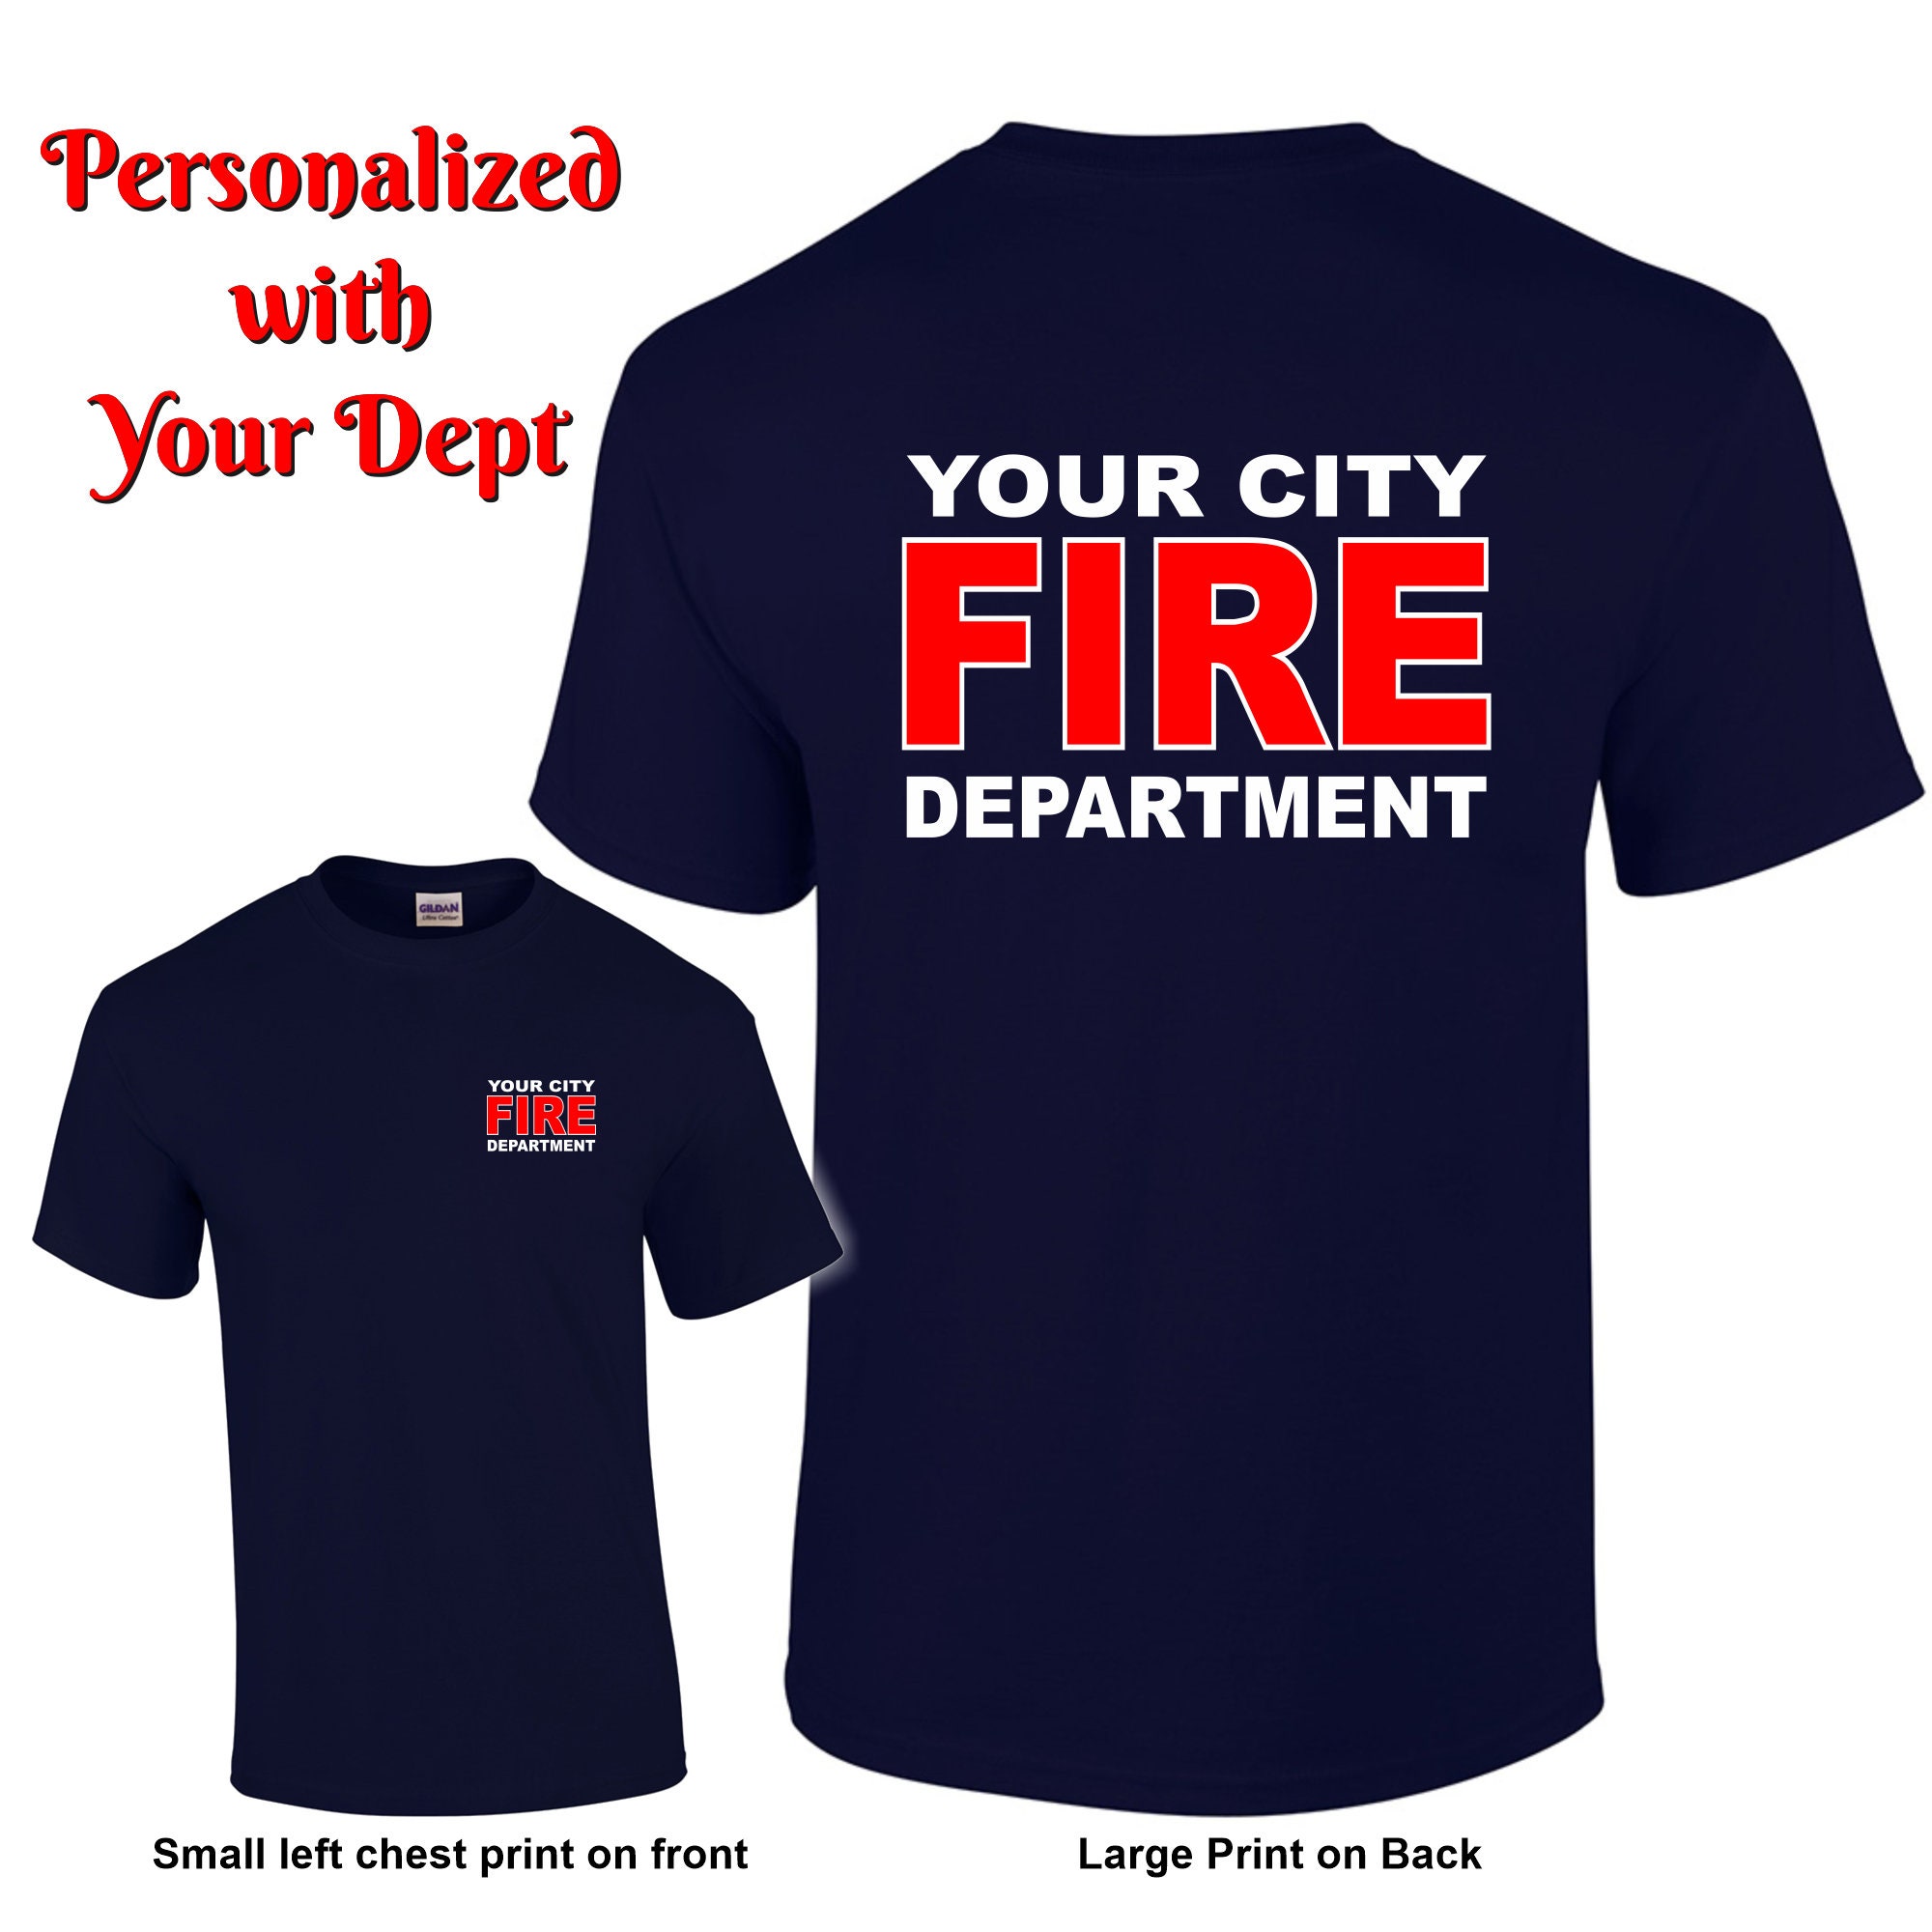 TEAMLOGO Personalized Fire Department Youth T-Shirt - Your Department - Made to Order